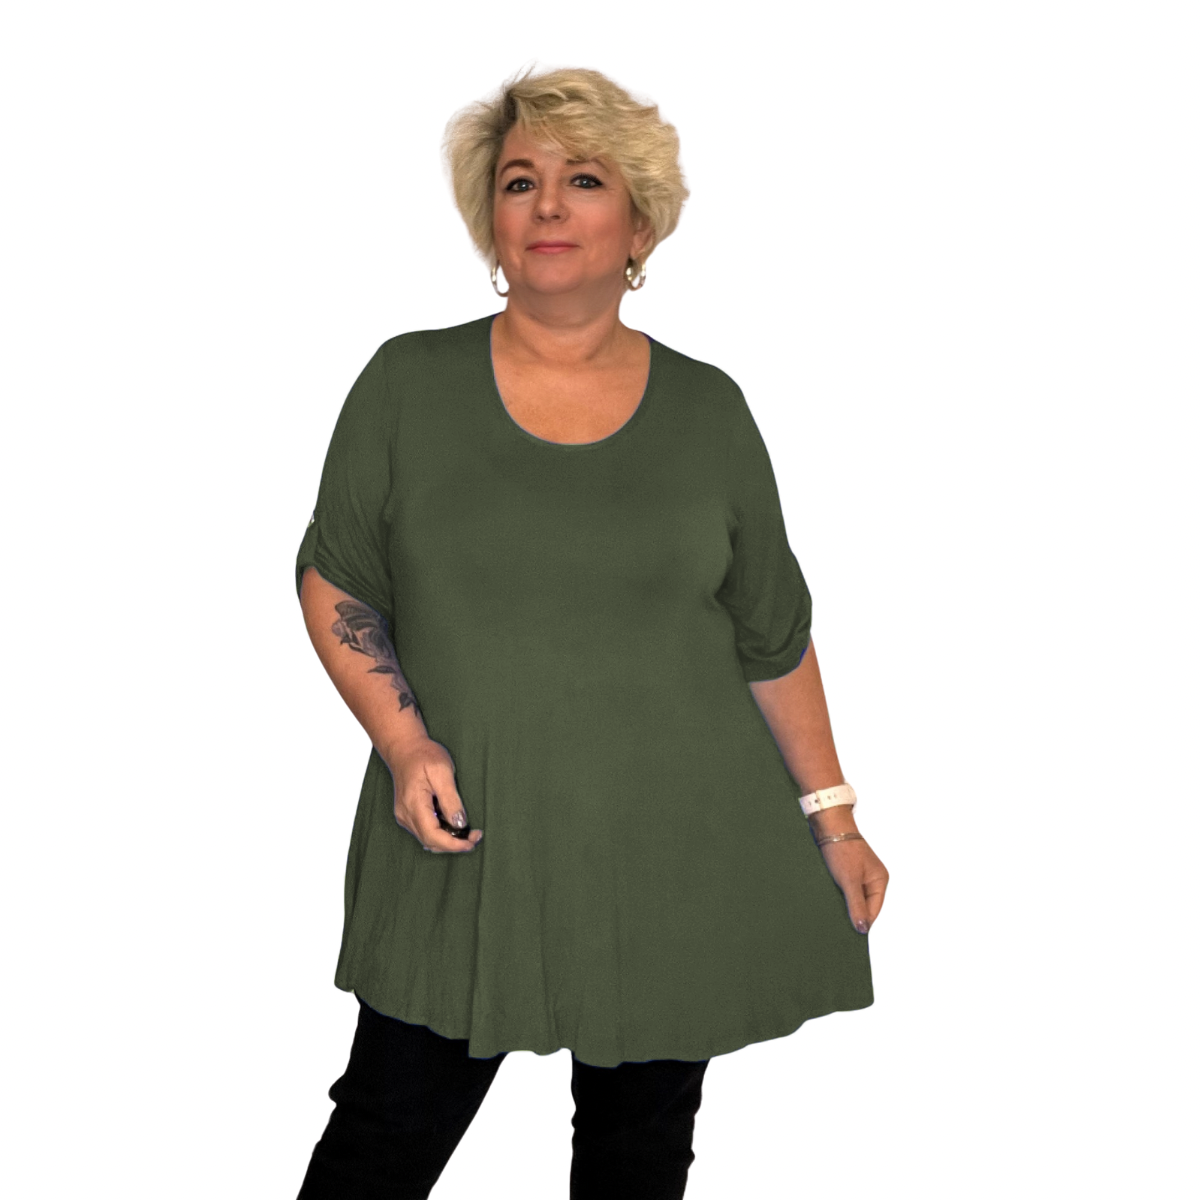 LOOSE FITTING A-LINE SWING TOP WITH BUTTON SLEEVES